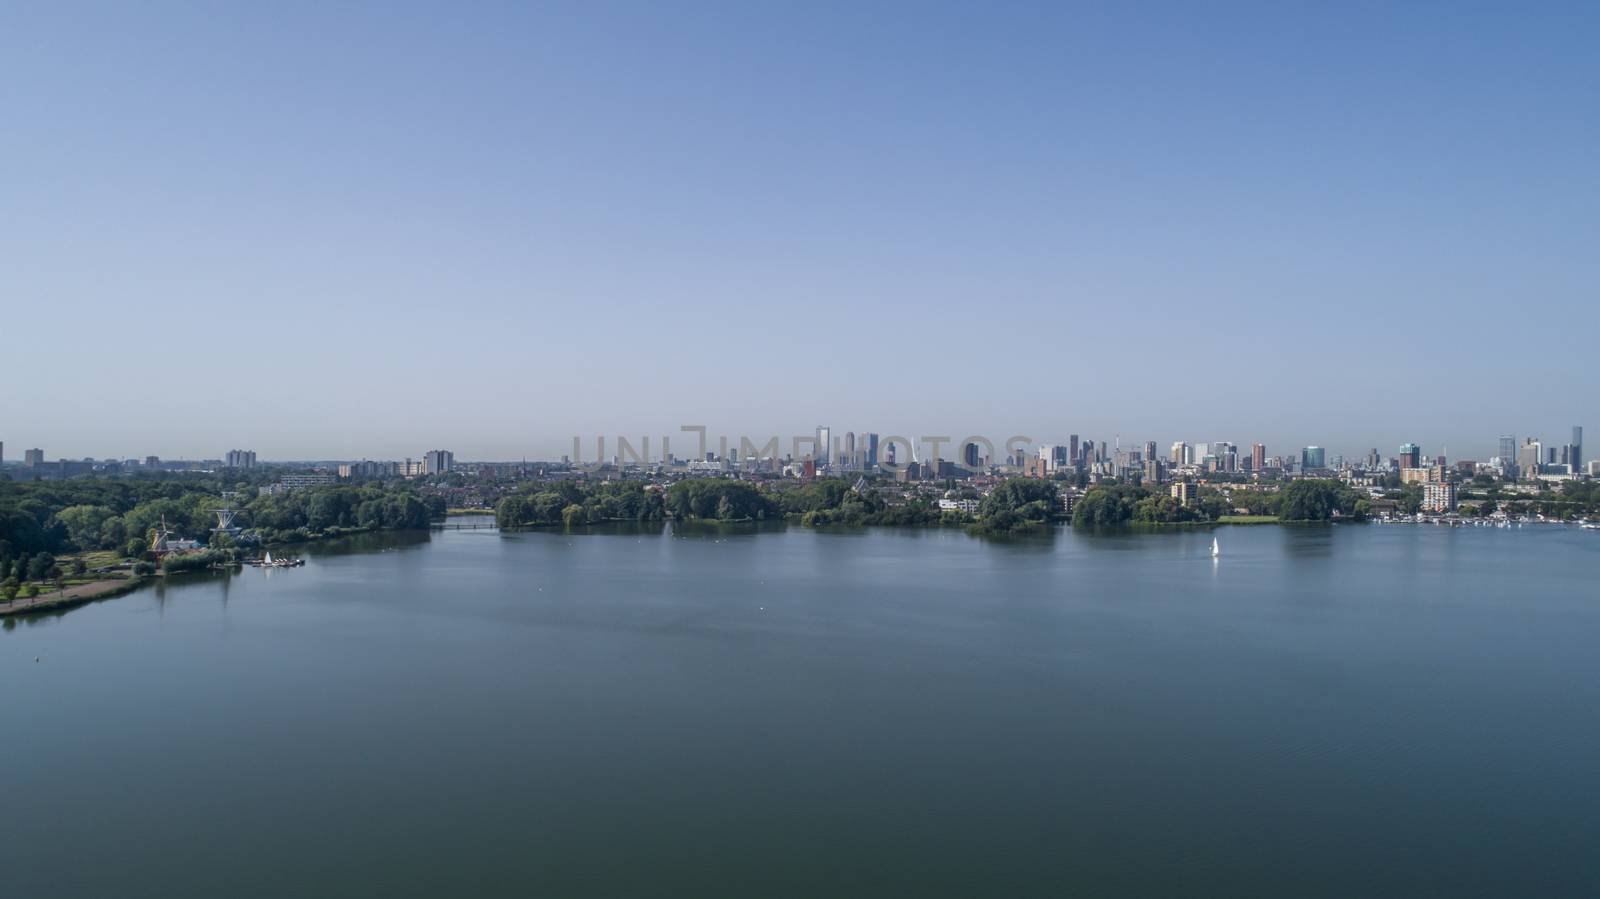 View on the skyline of Rotterdam as seen from the Kralingse Bos by Tjeerdkruse